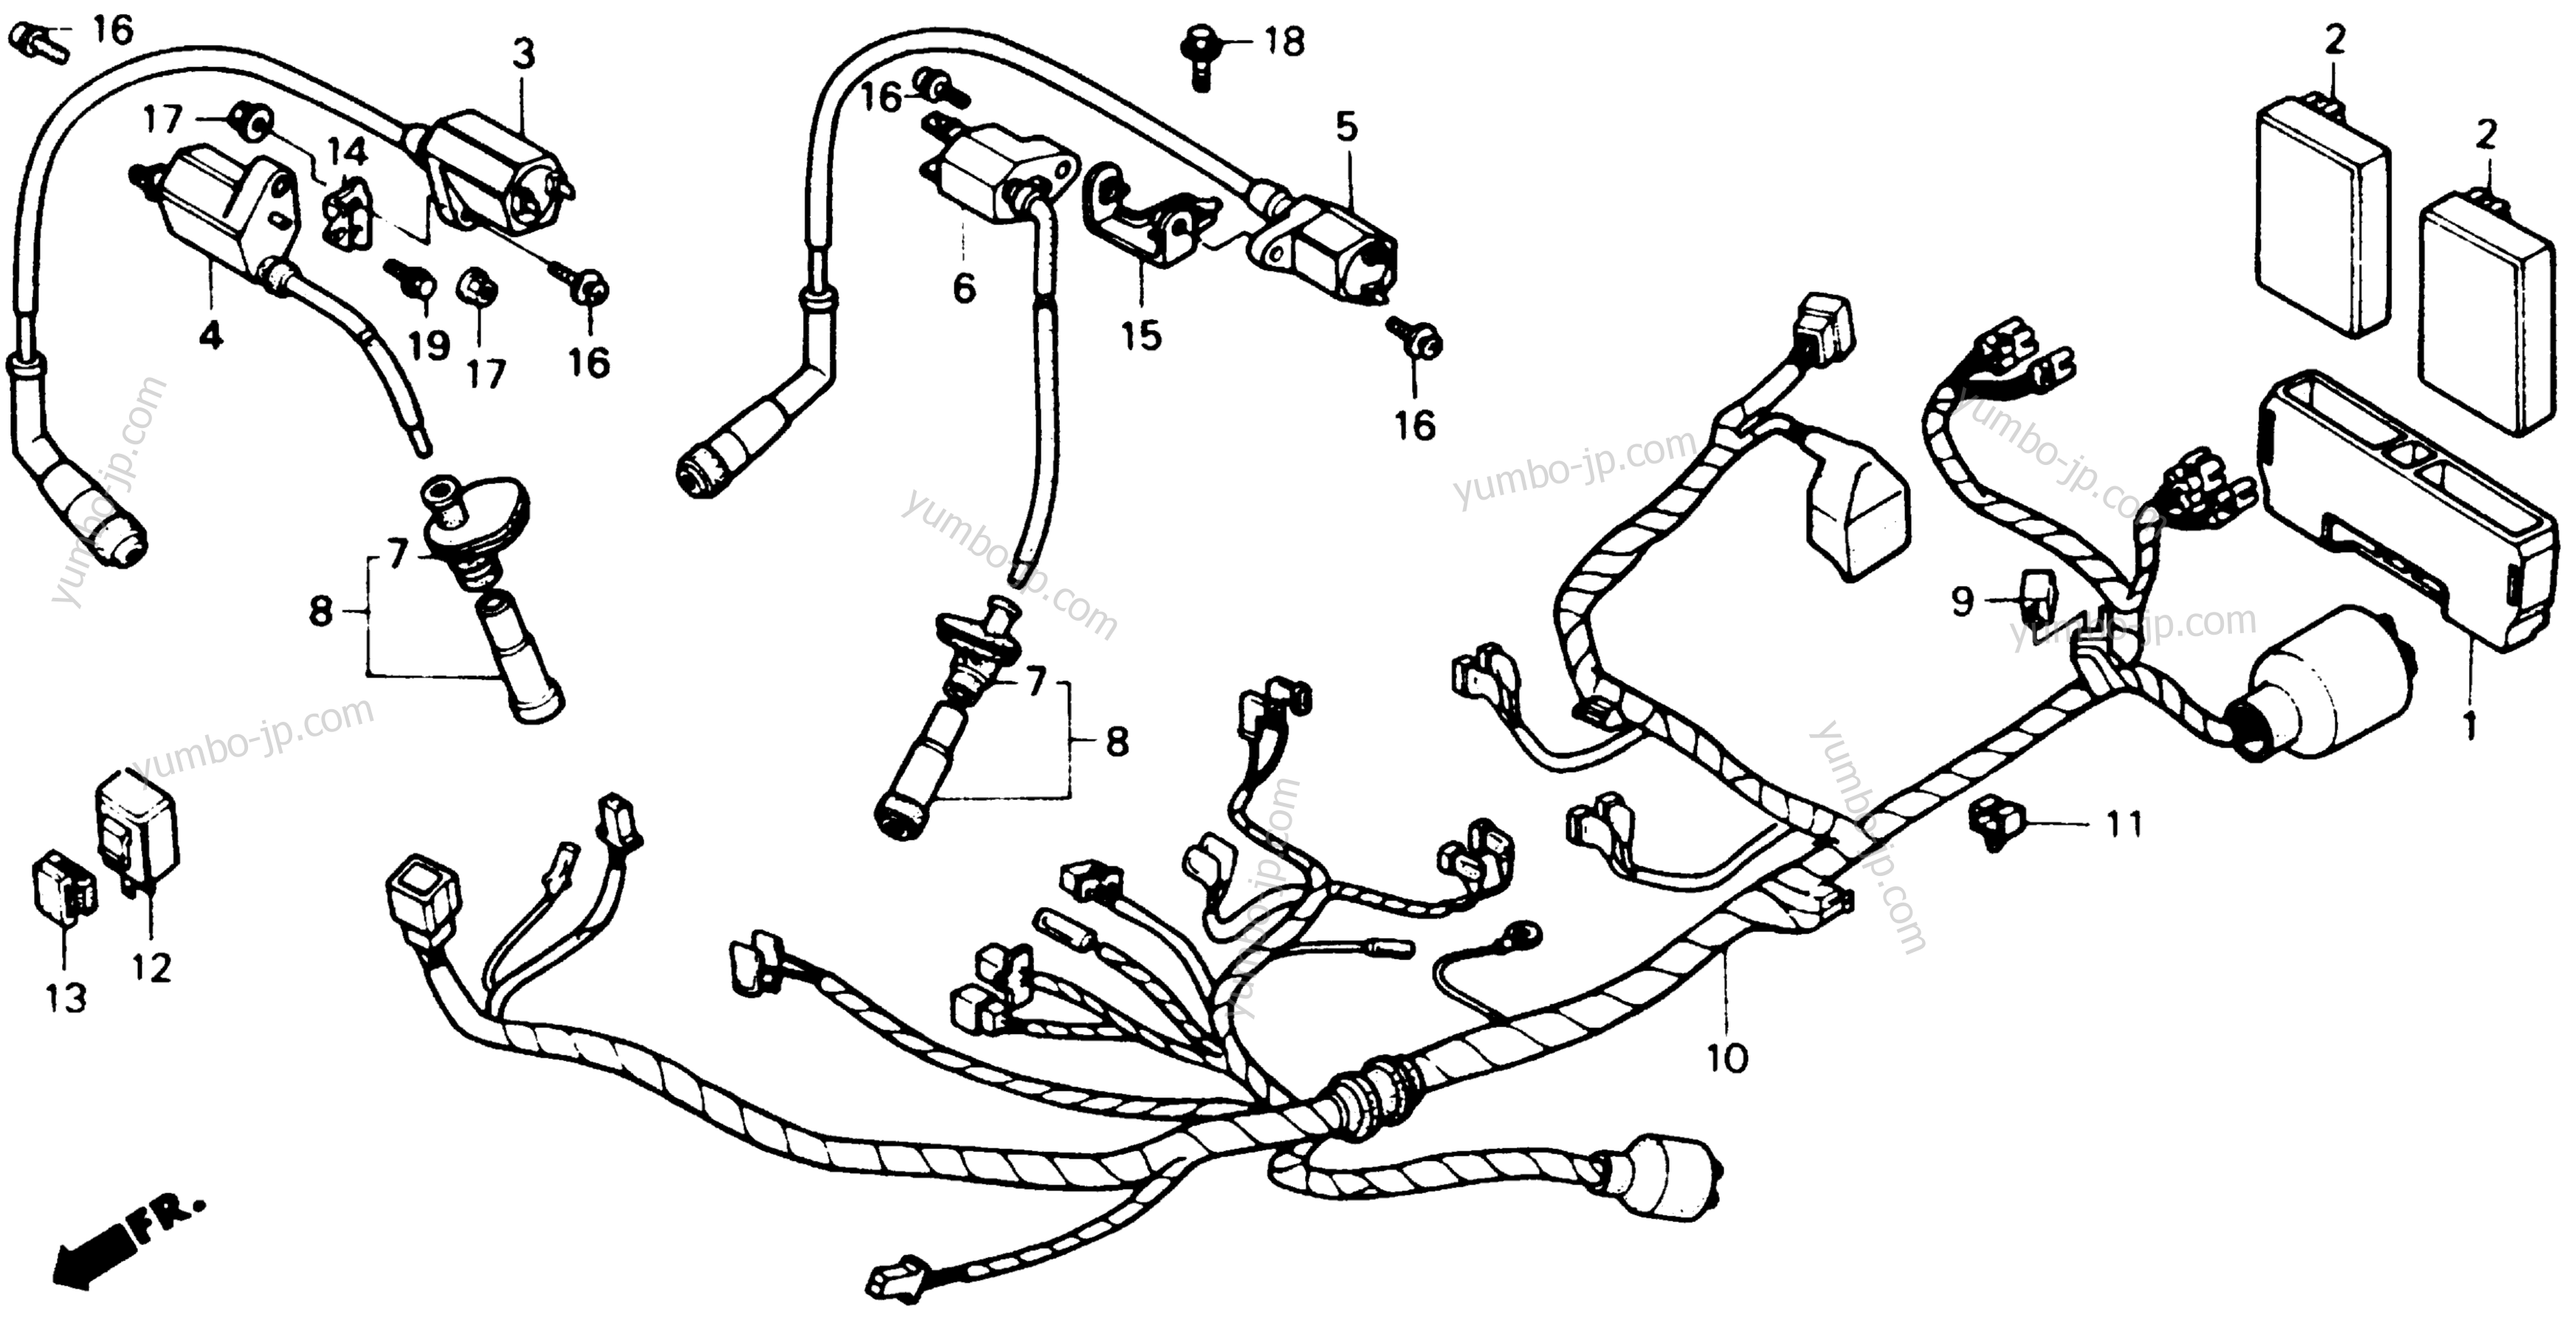 WIRE HARNESS for motorcycles HONDA XL600V AC 1989 year